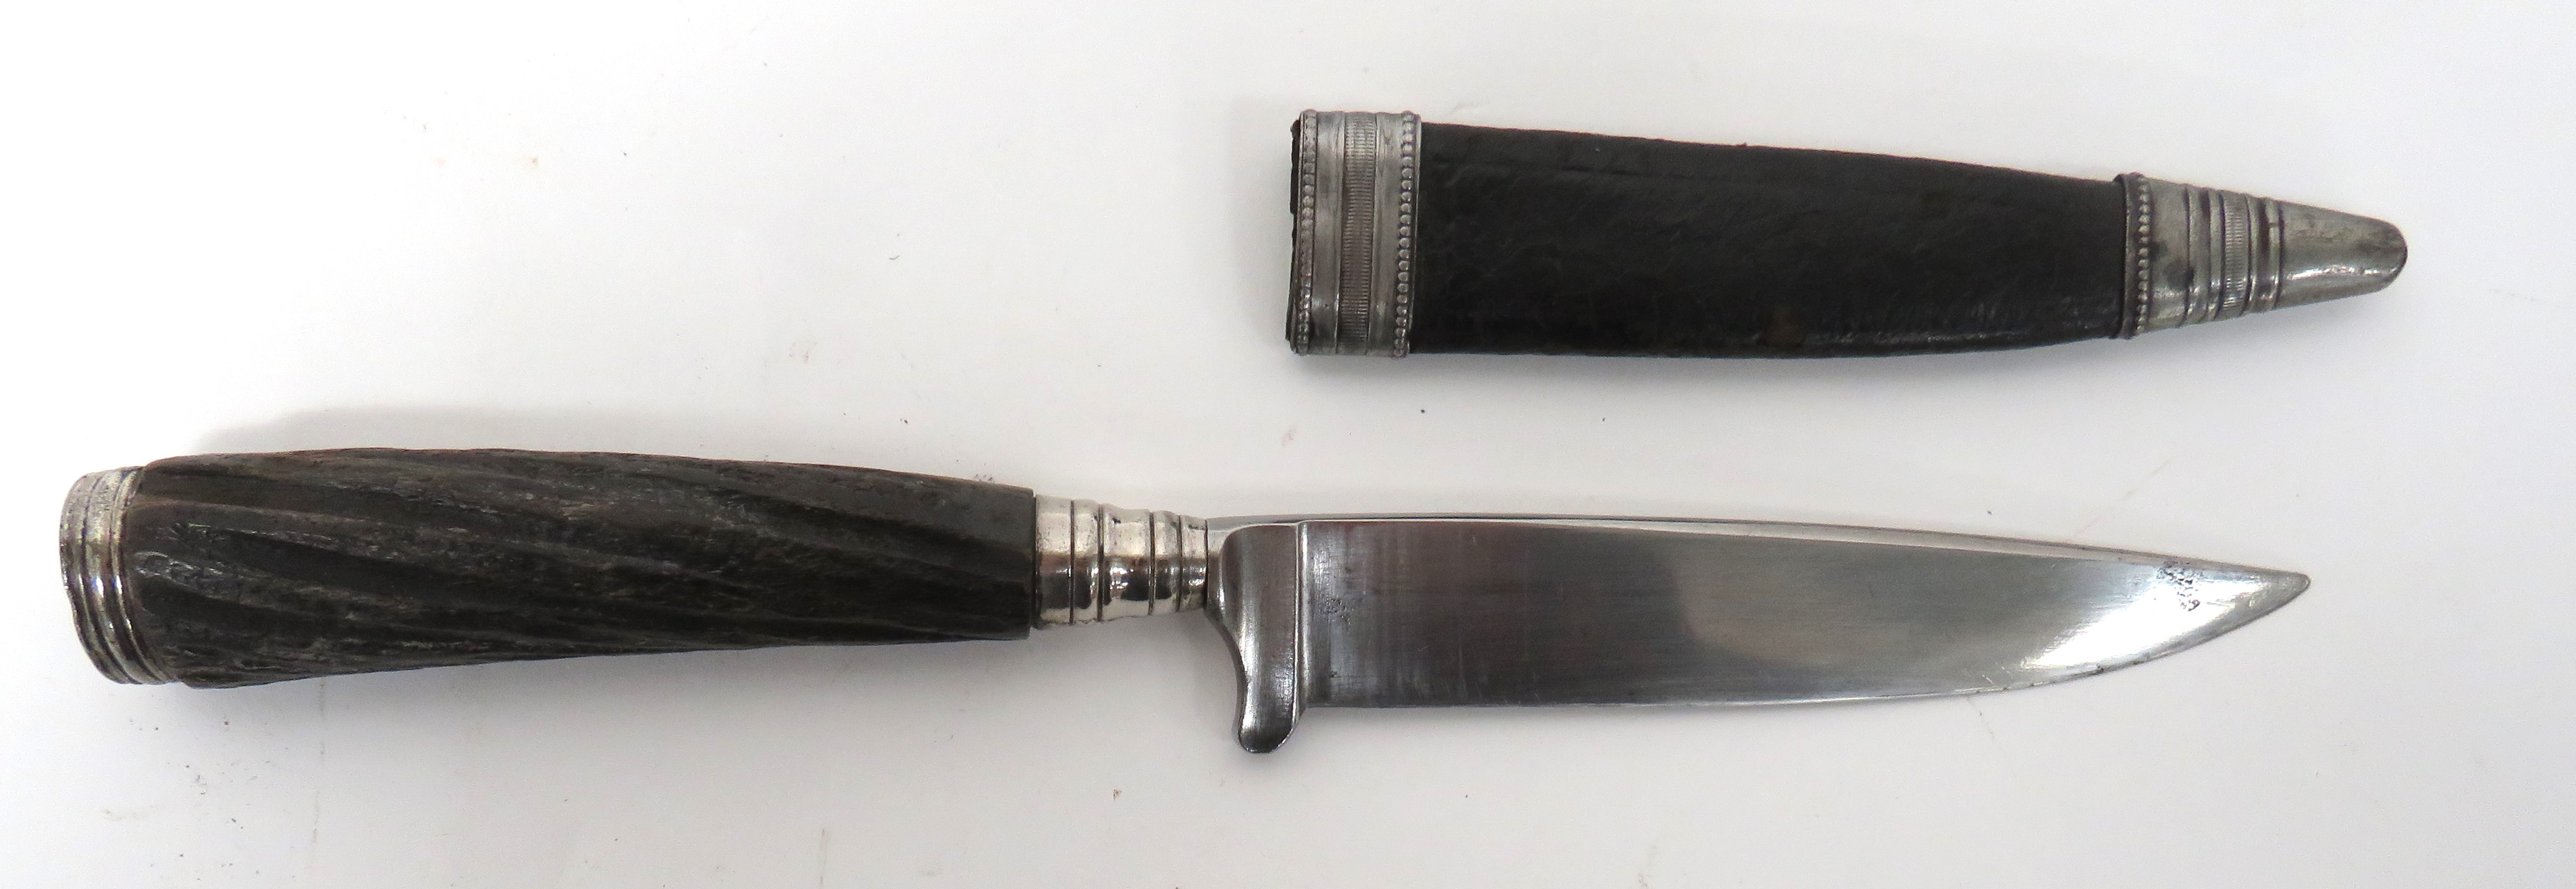 WW1 Imperial German Trench Knife 5 inch, single edged blade with built in crossguard and ribbed